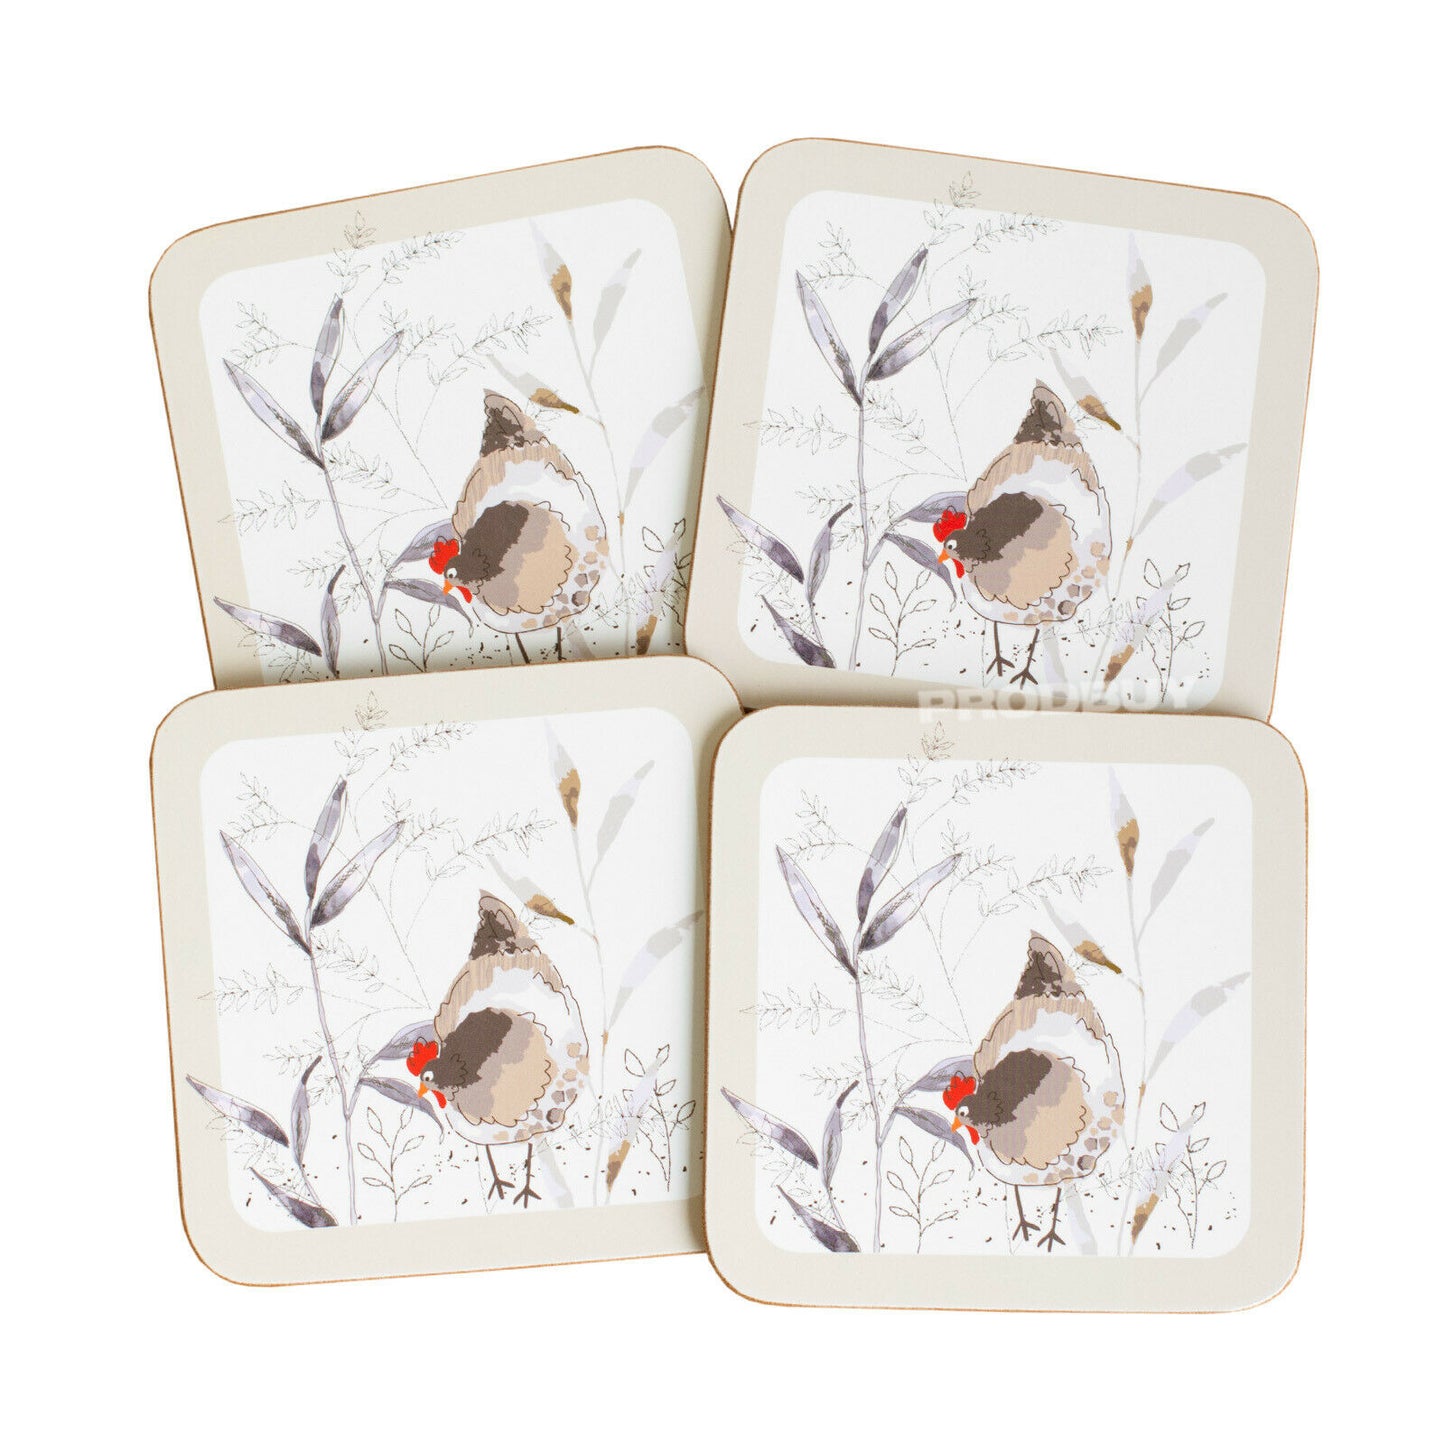 Country Hens Set of 4 Placemats & 4 Coasters